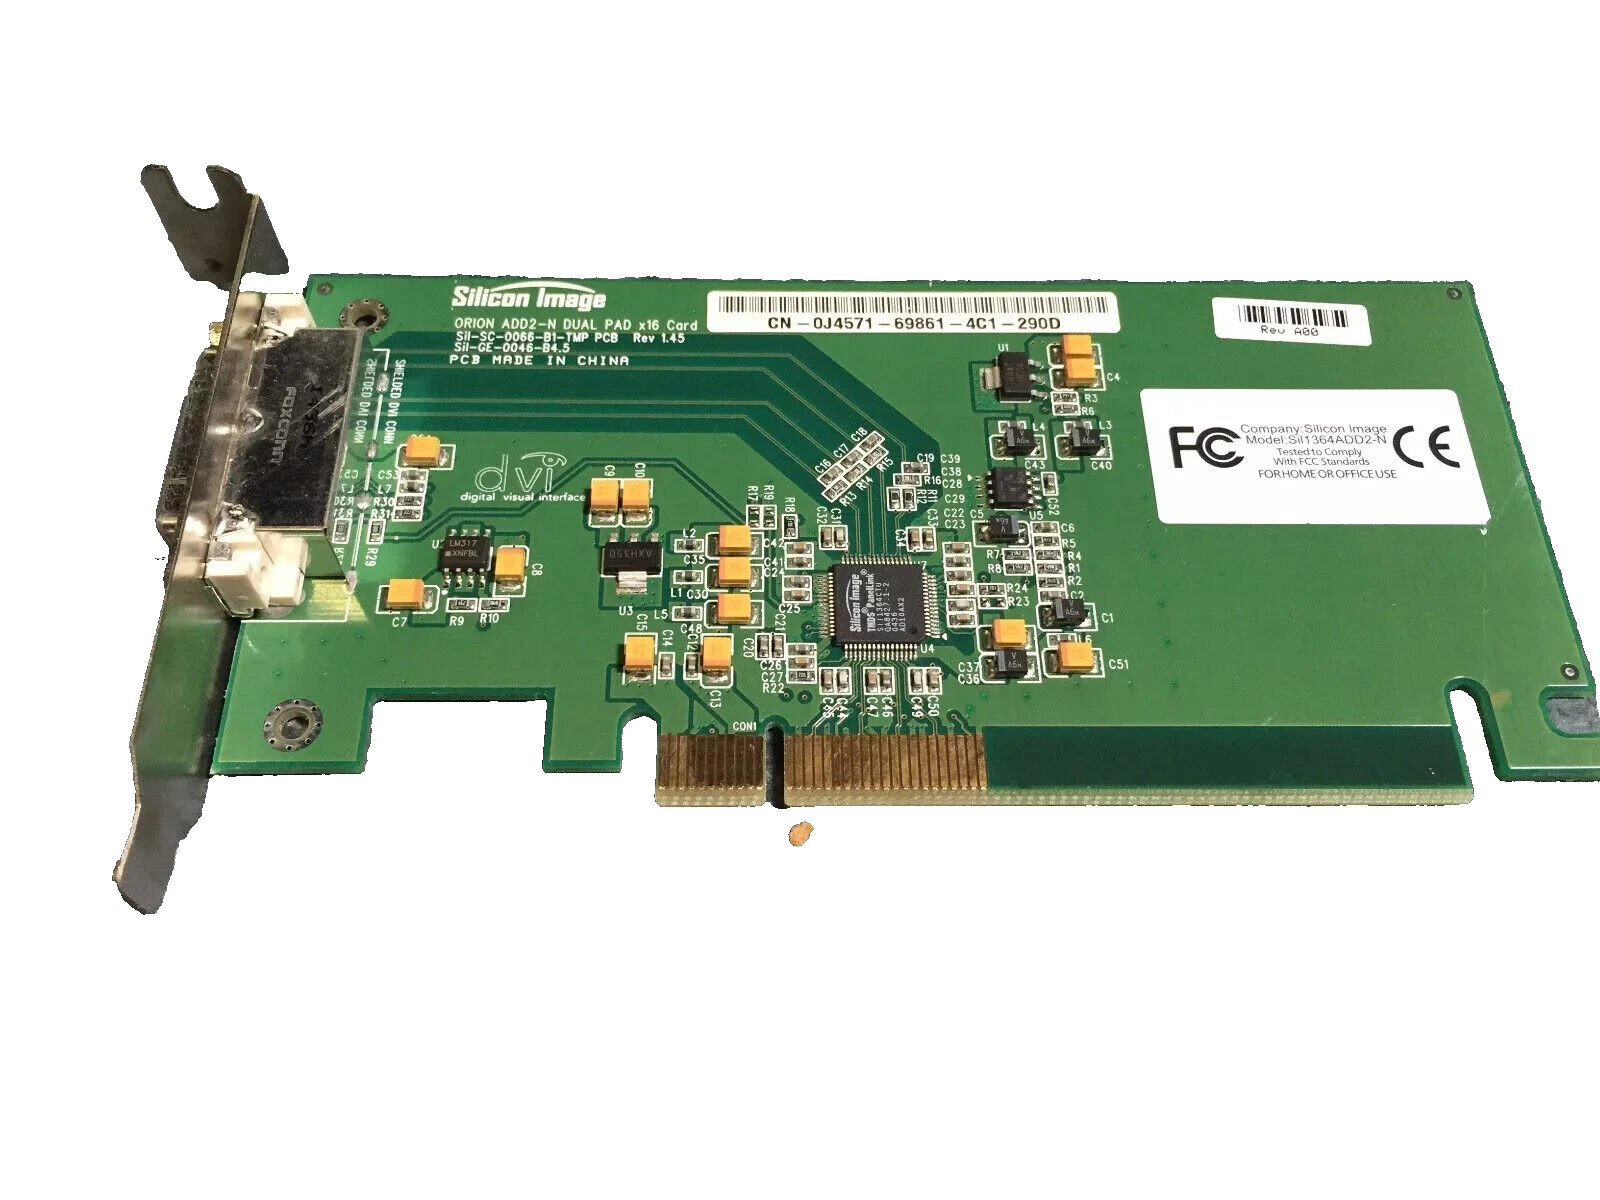 Silicon Image Sil1364ADD2-N Dell CN-0J4571 Video Card